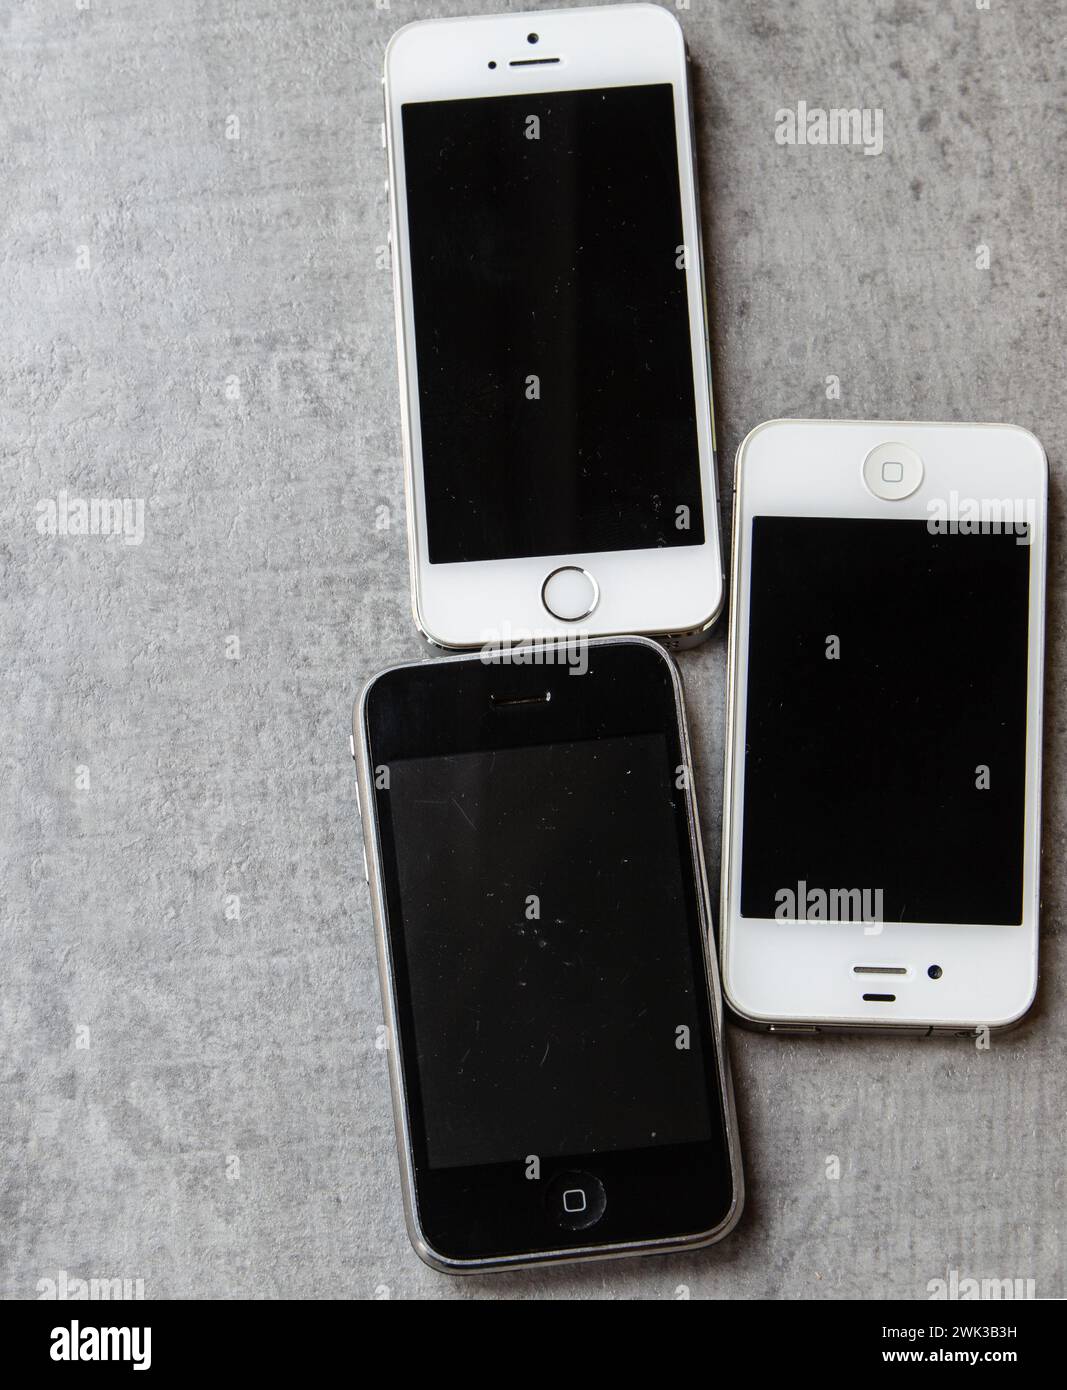 Older used Apple iPhones 3GS 5s and 4 Stock Photo